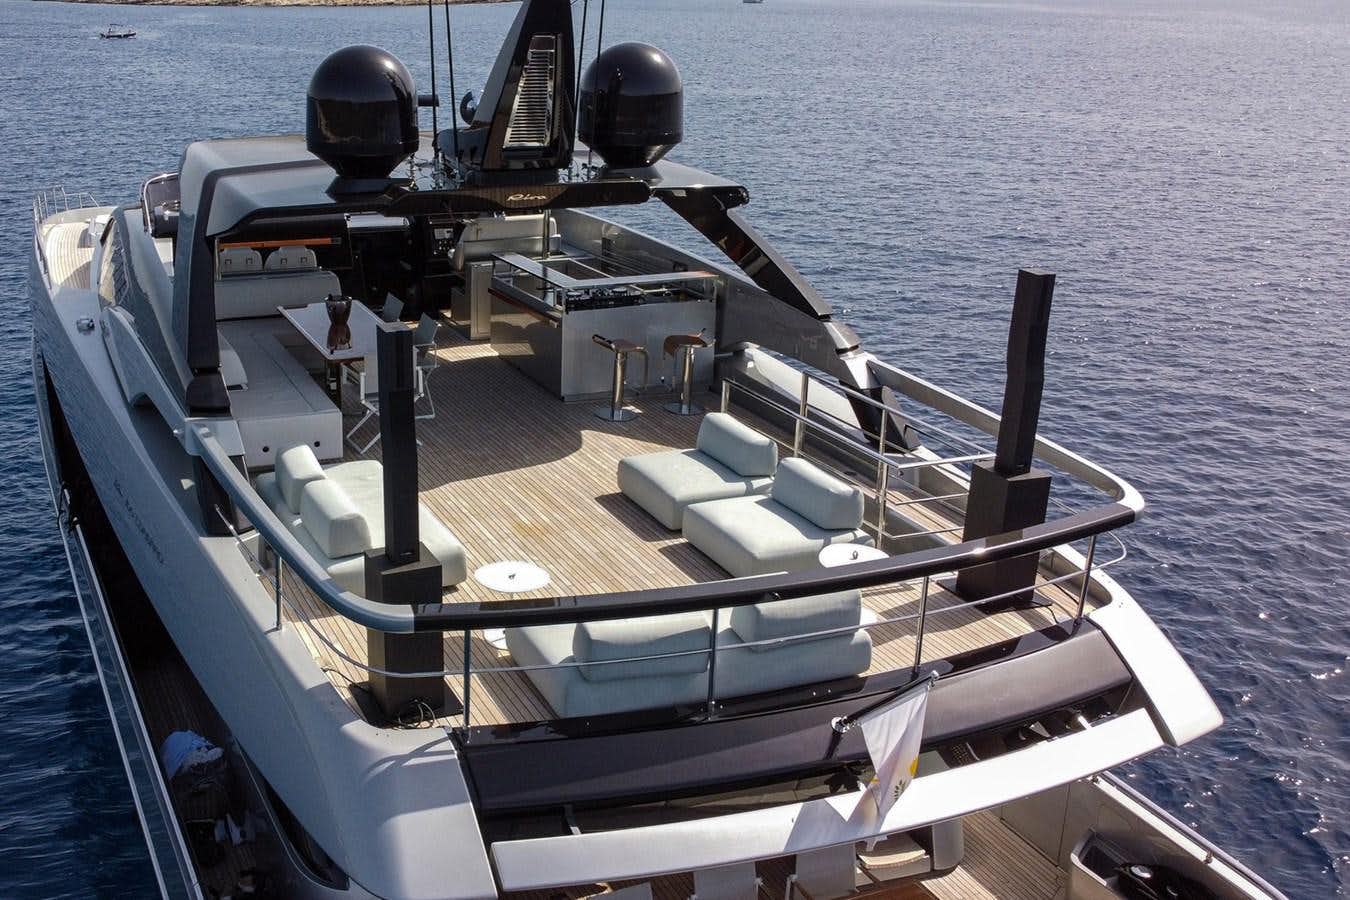 No stress
Yacht for Sale